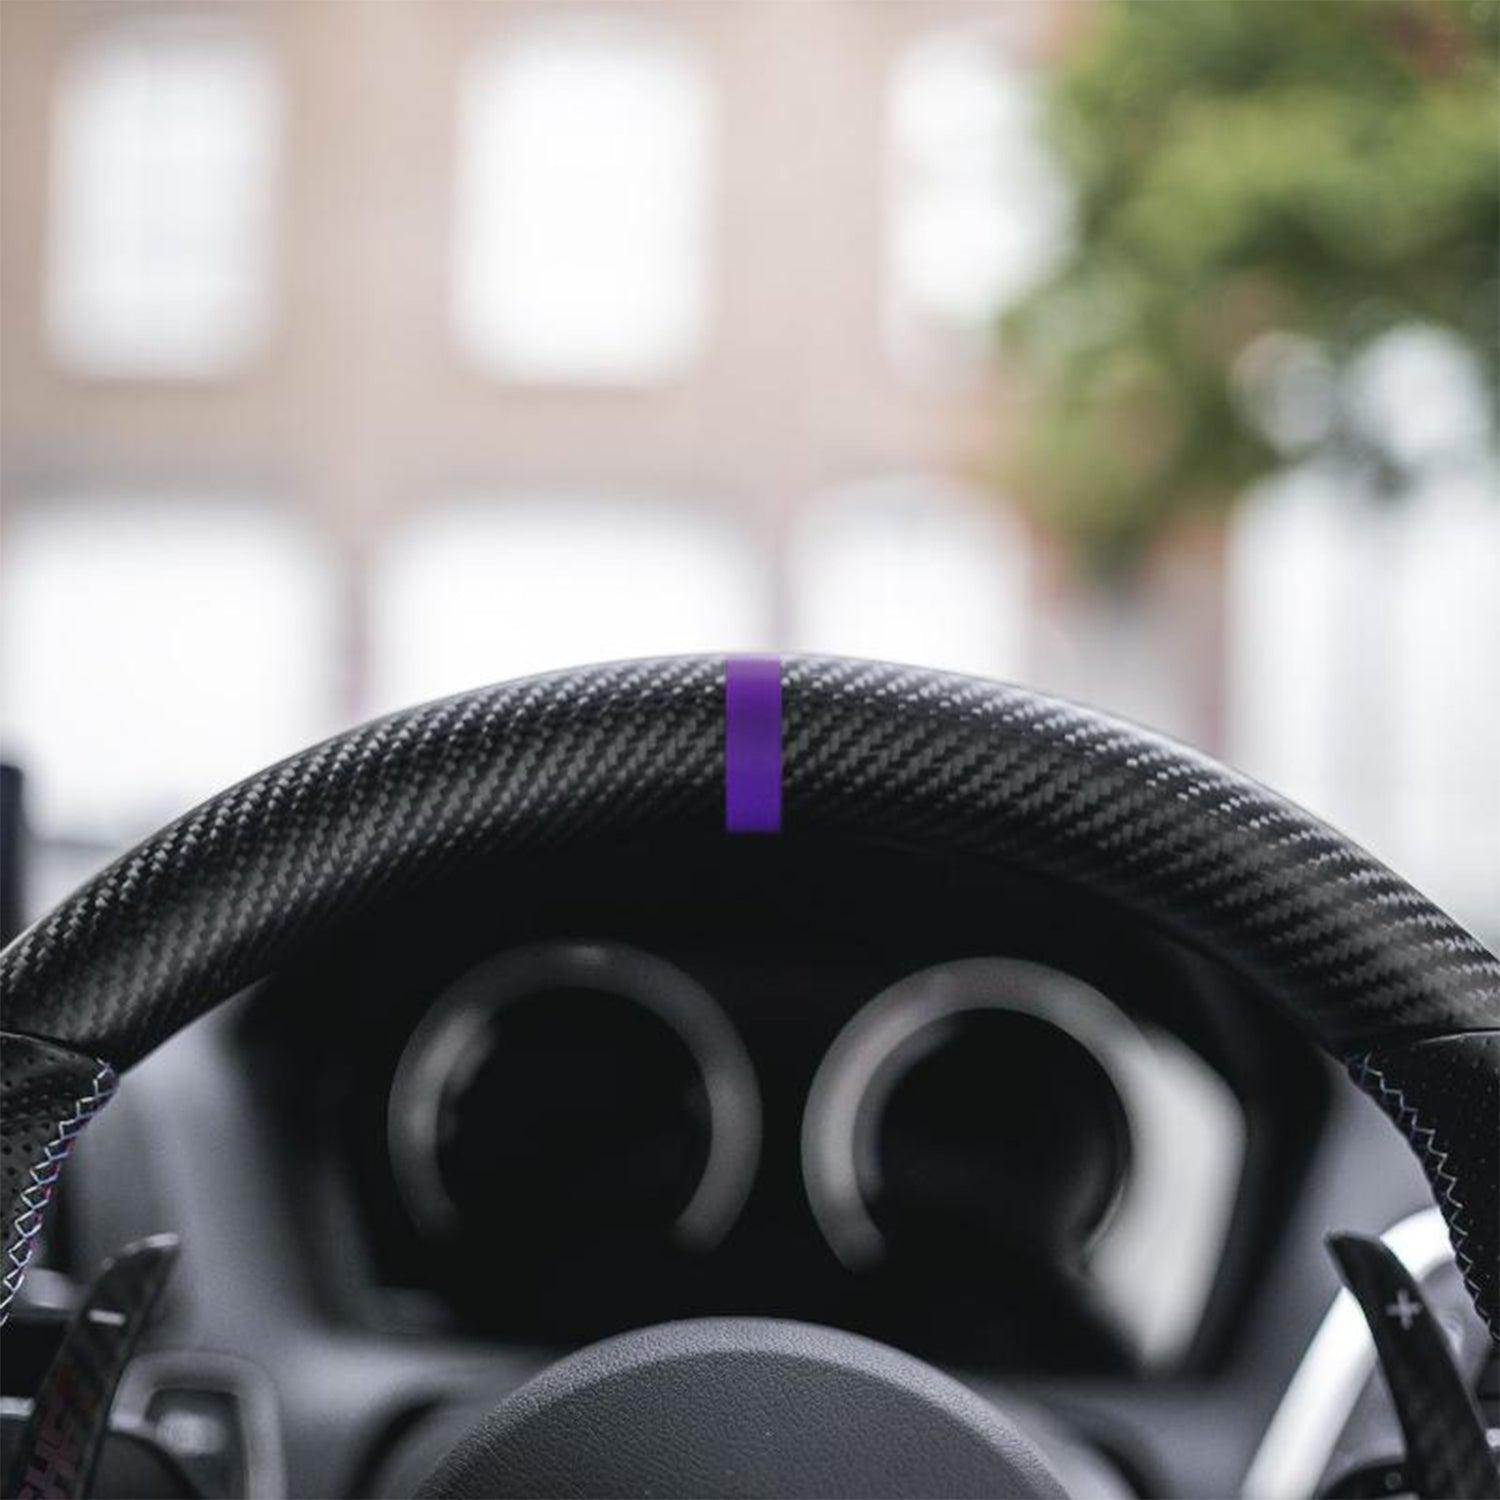 SHFT BMW F Series Flat Bottom Steering Wheel In Matte Carbon & Perforated Leather-R44 Performance